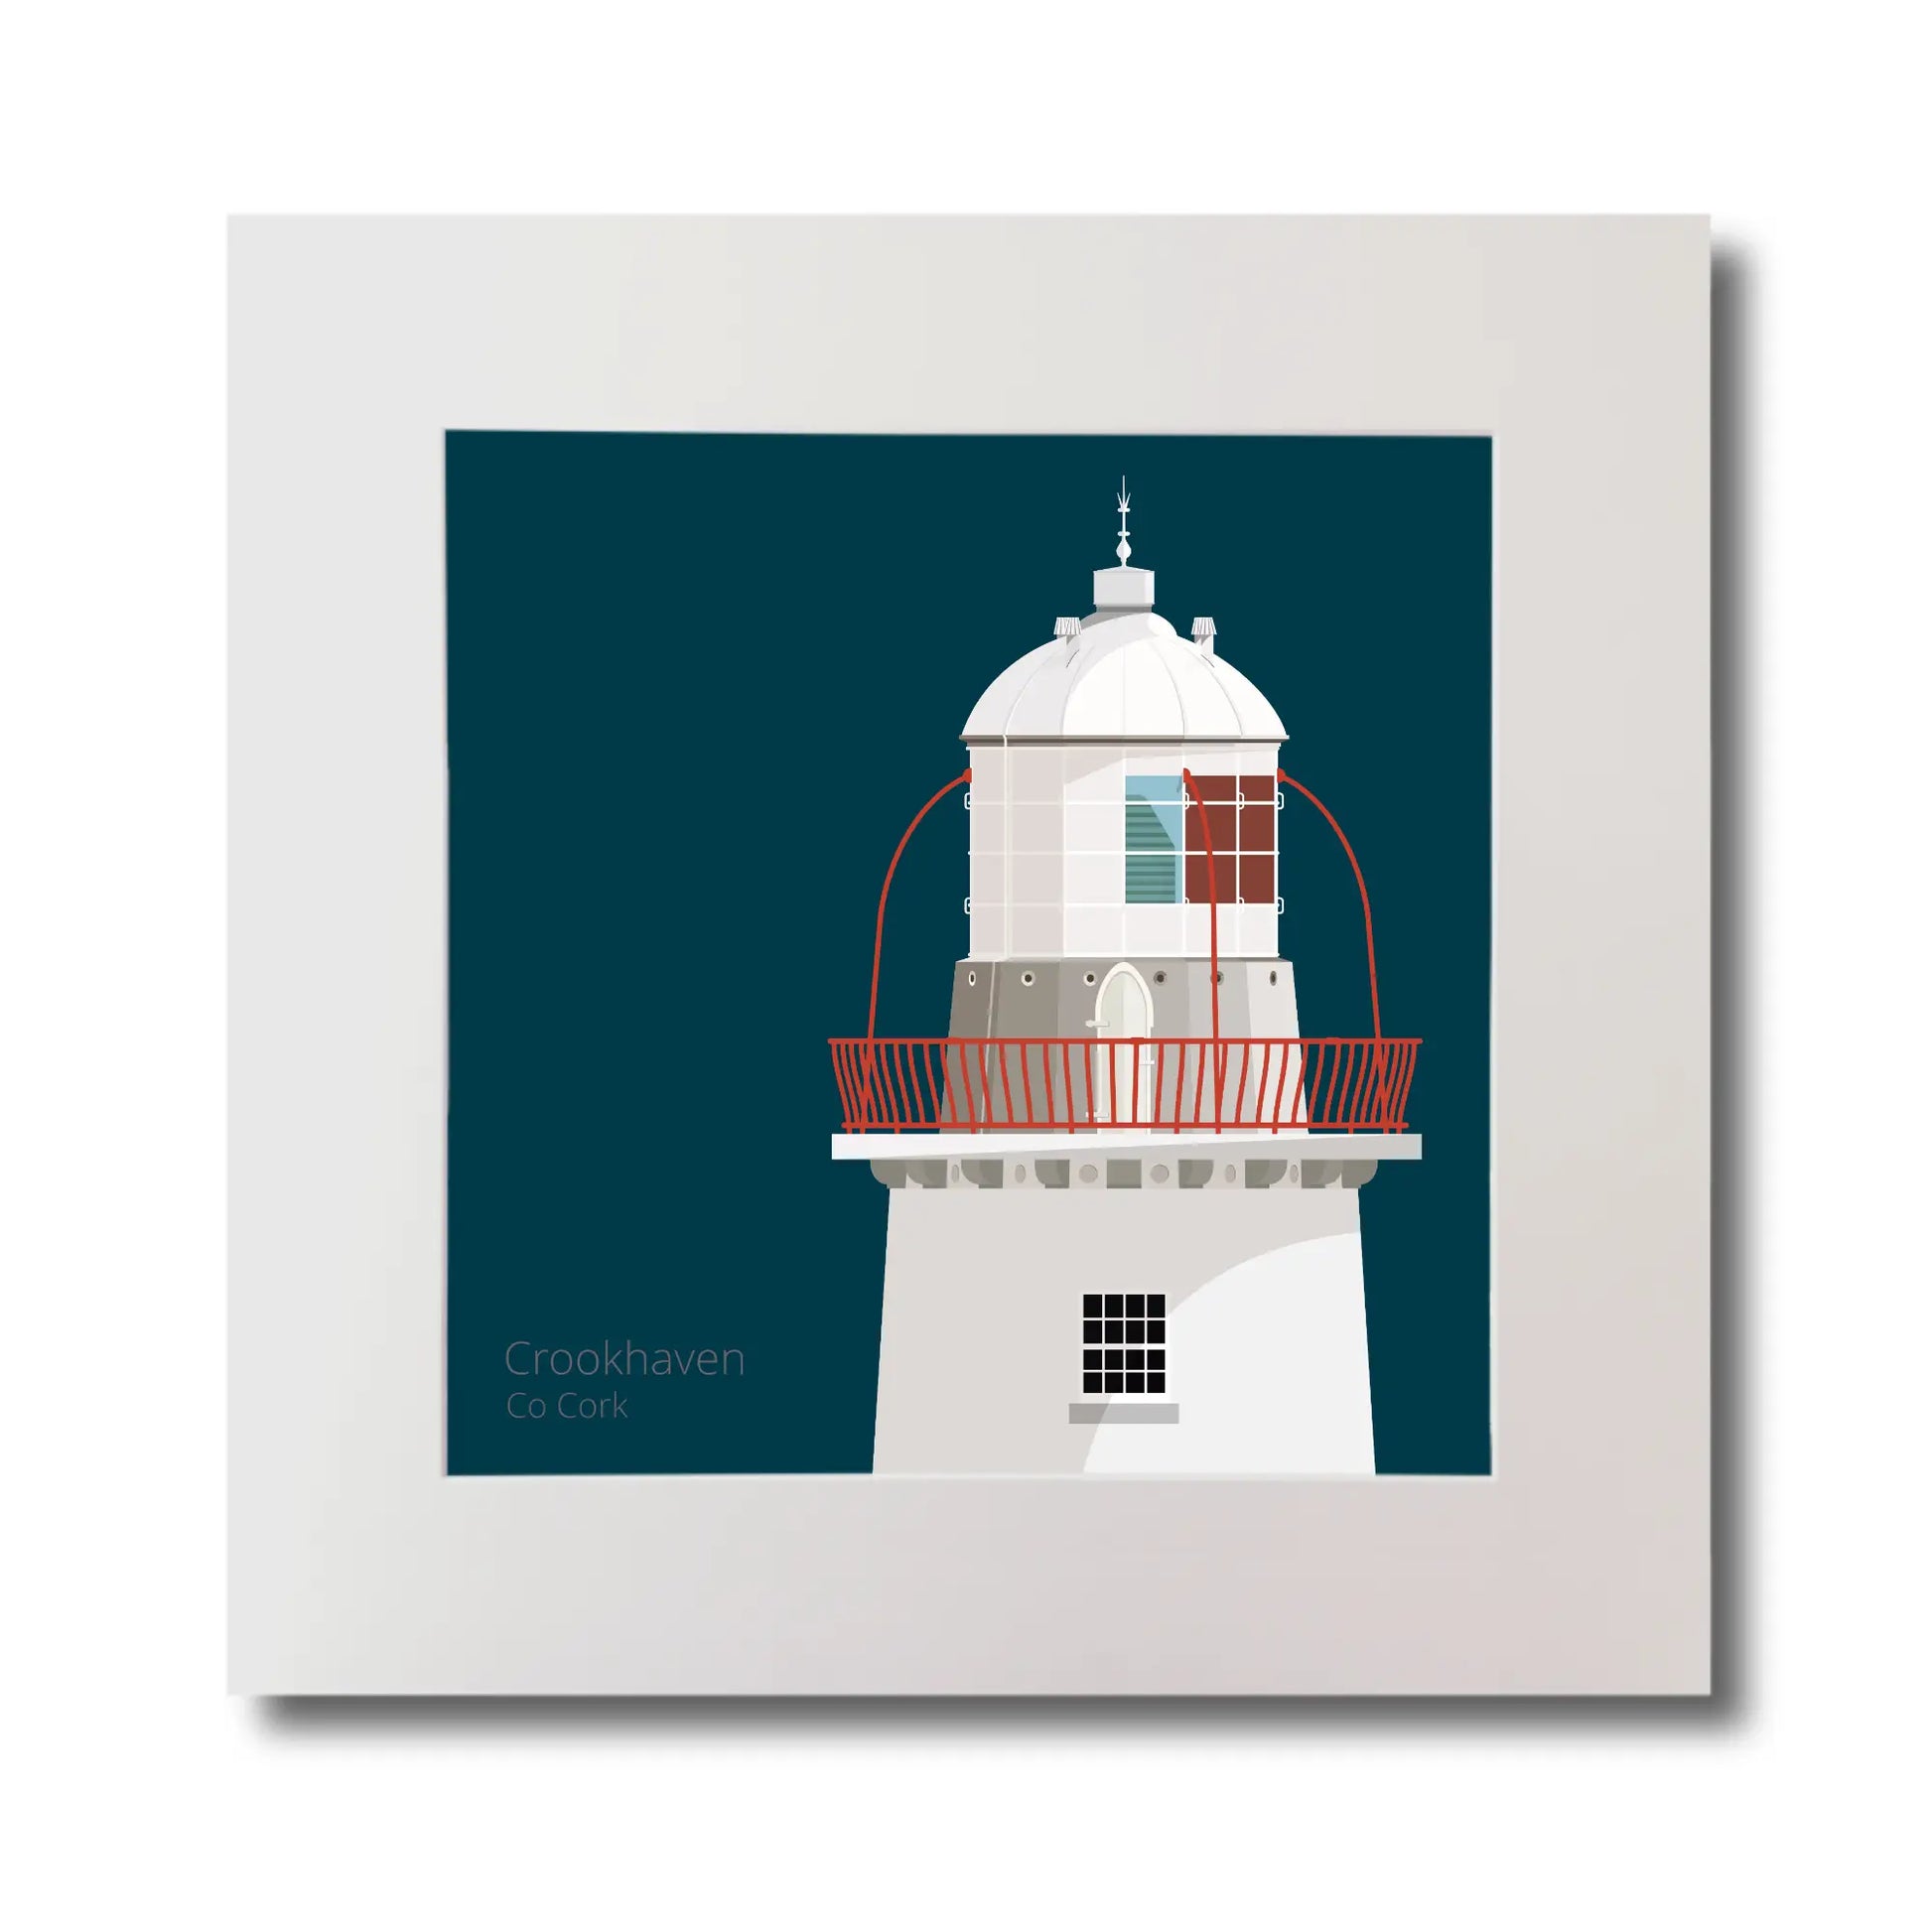 Illustration of Crookhaven lighthouse on a midnight blue background, mounted and measuring 30x30cm.